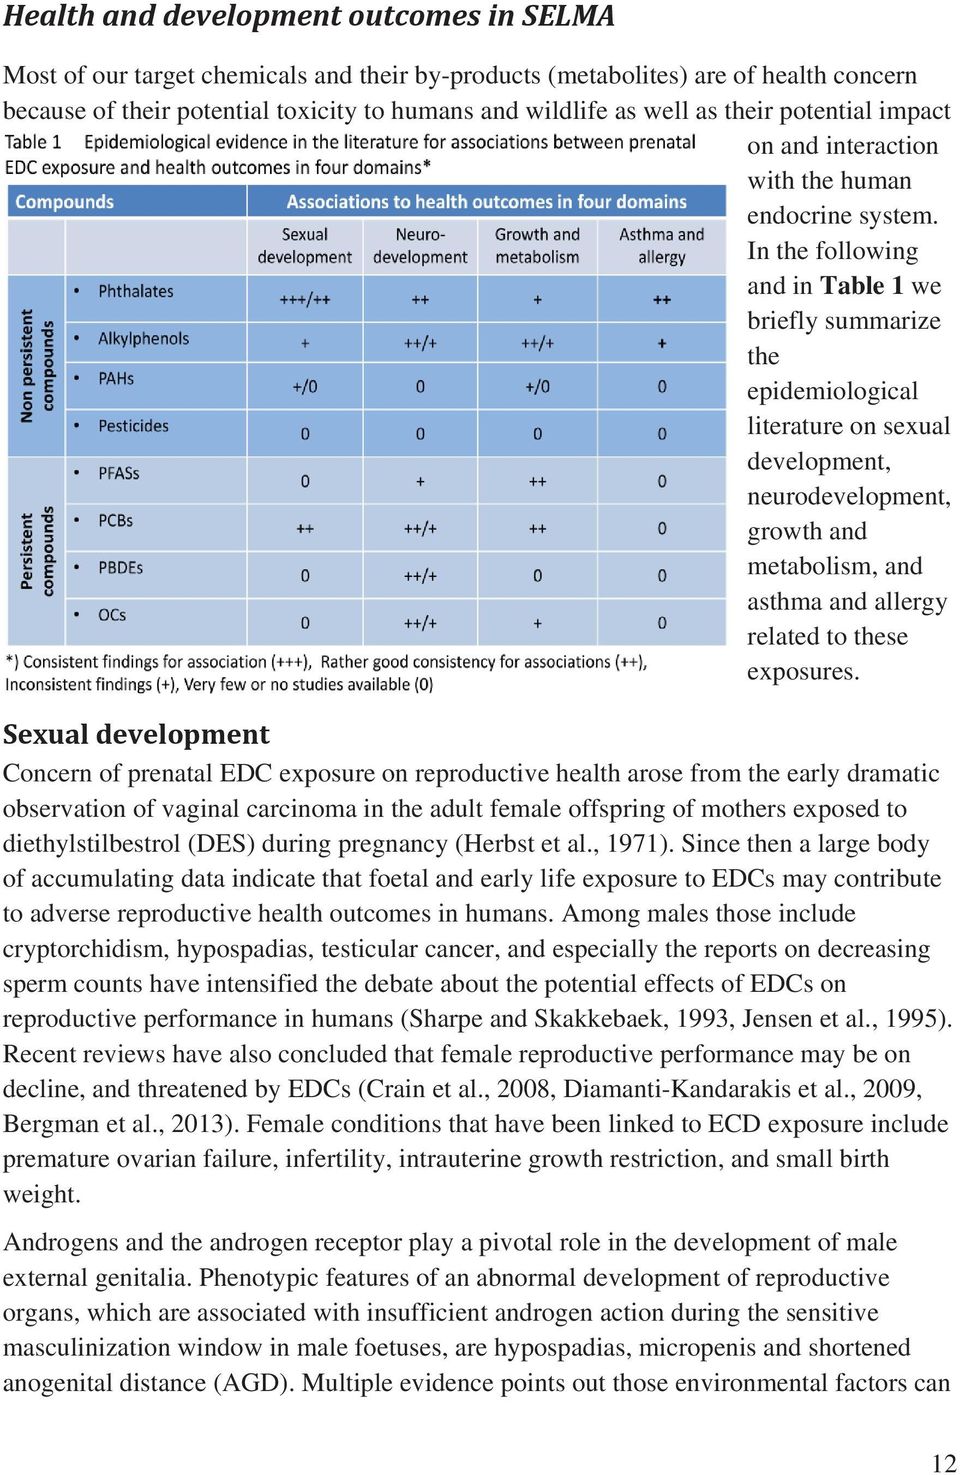 In the following and in Table 1 we briefly summarize the epidemiological literature on sexual development, neurodevelopment, growth and metabolism, and asthma and allergy related to these exposures.